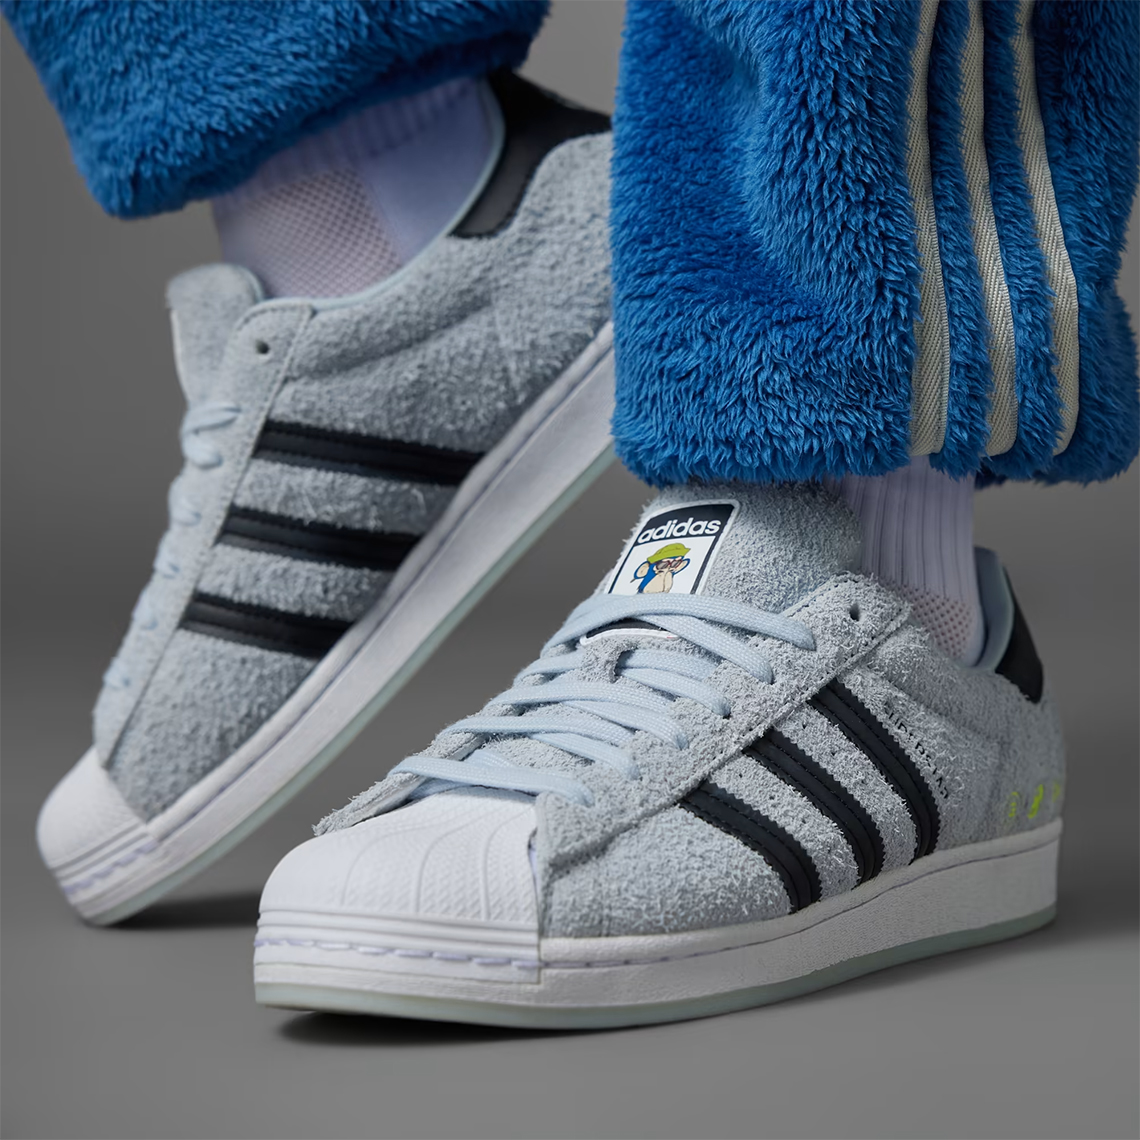 Bored Ape Yacht Club Adidas Superstar Into The Metaverse Ie1841 9